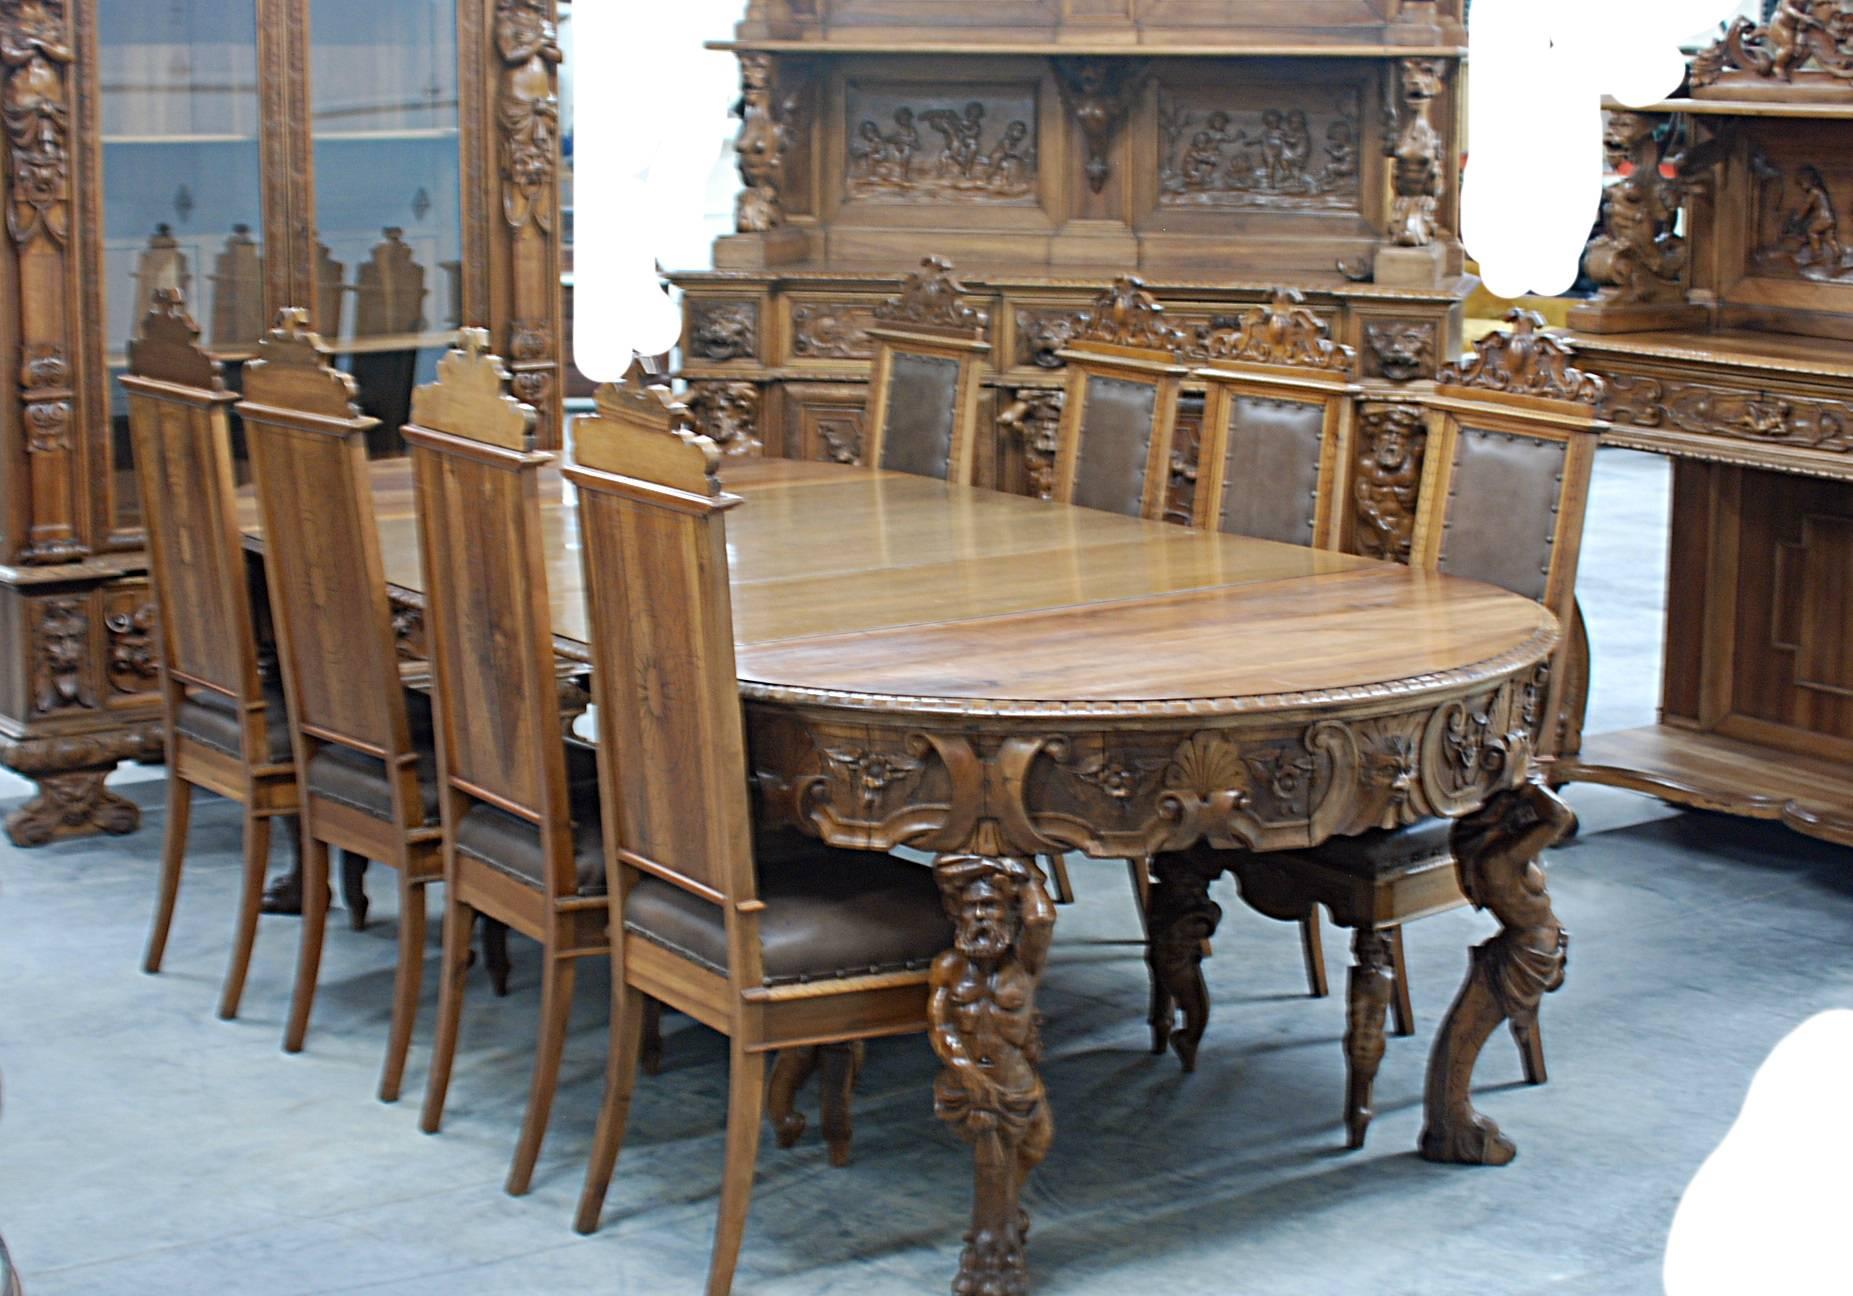 This incredible carved walnut dining room set includes:

Two-door china cabinet with figural maidens, cherubs and North wind face. 24.5